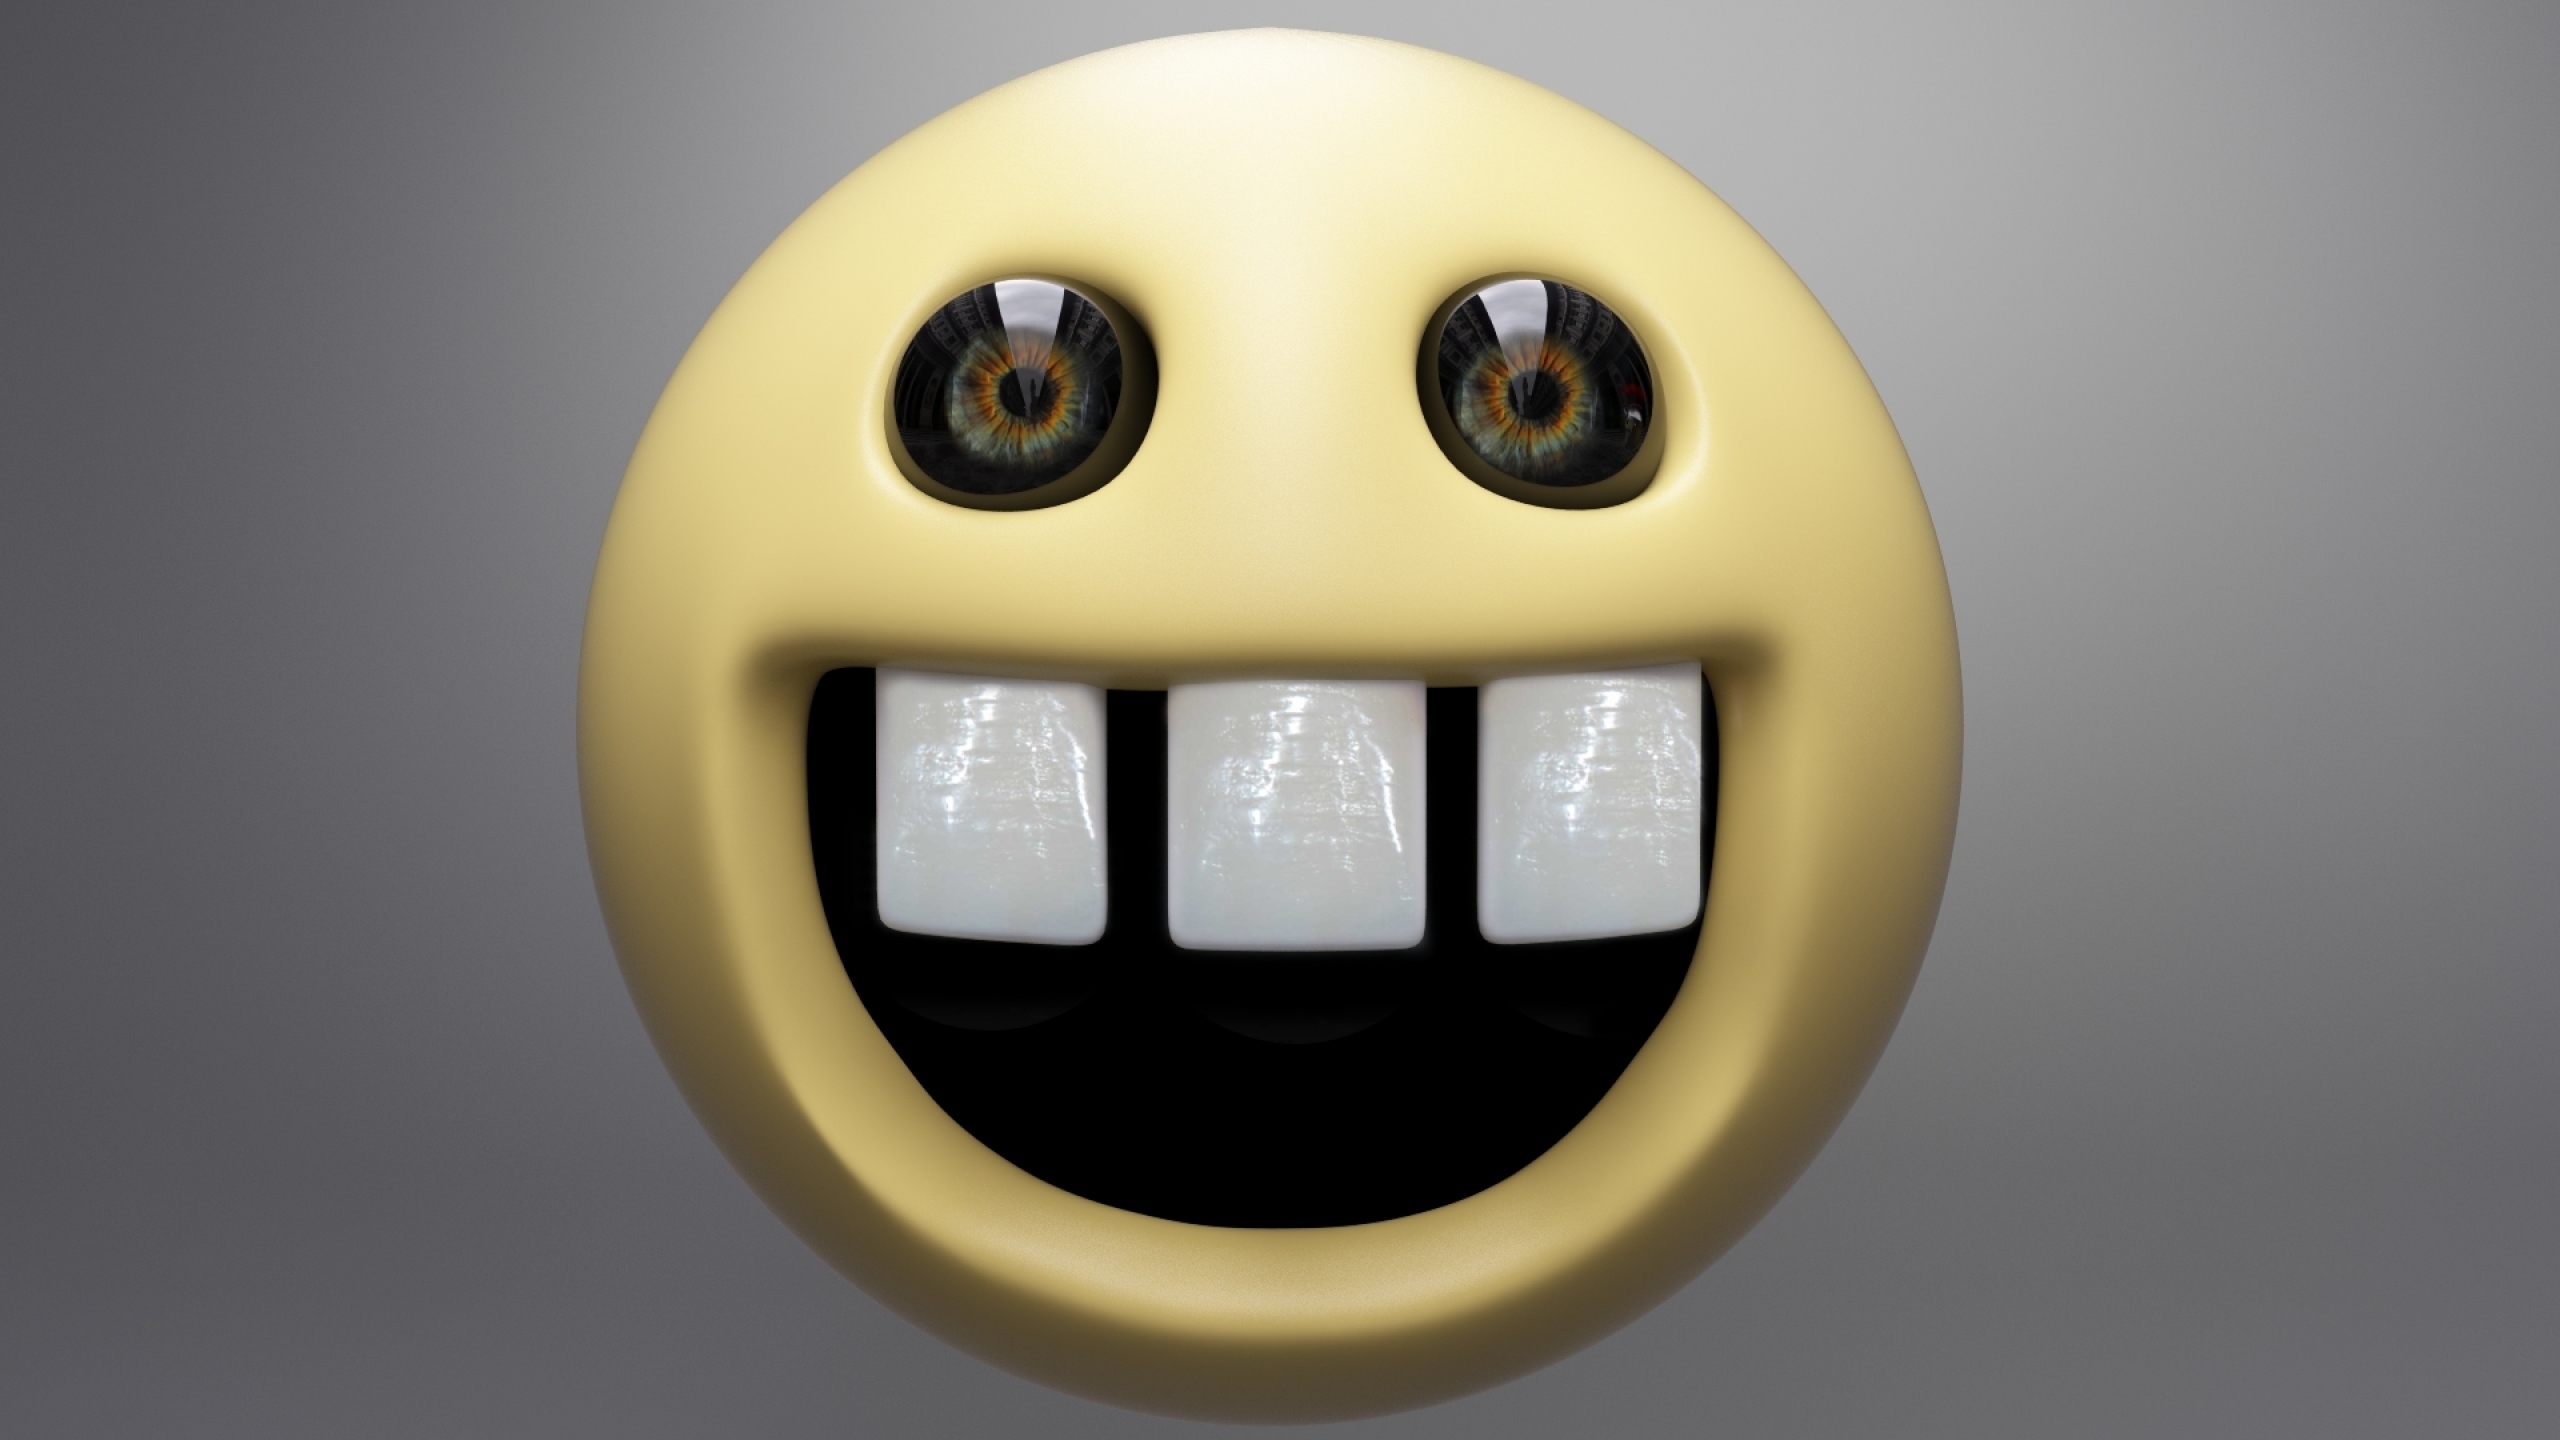 General 2560x1440 emoticons humor CGI awesome face gray background digital art simple background